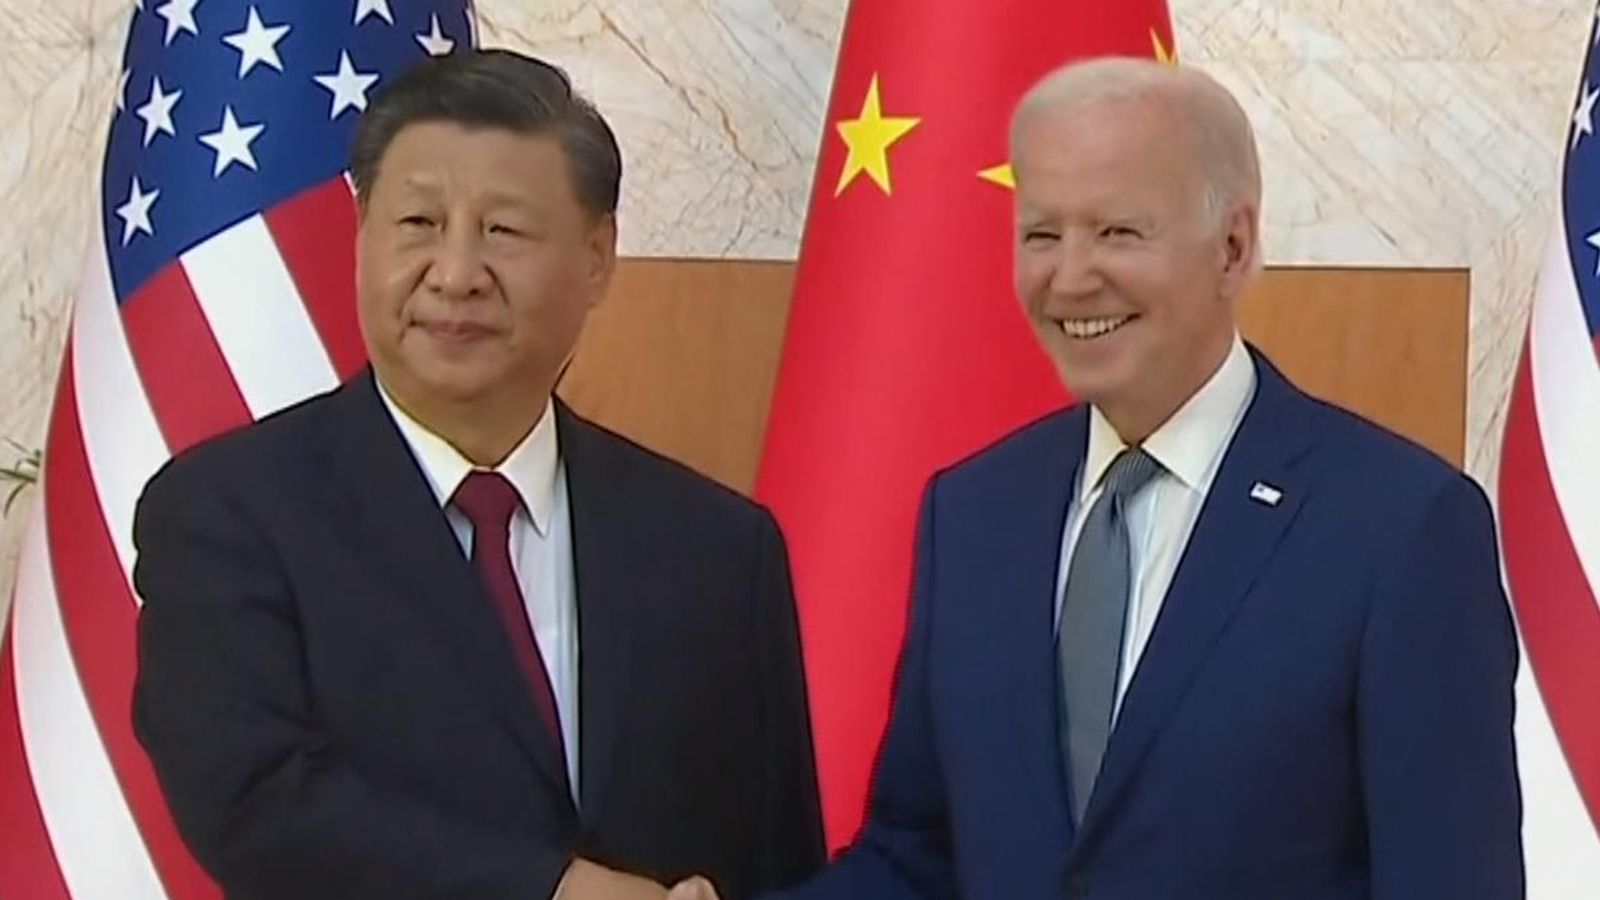 Biden says Chinese president does not want to 'rip the relationship' with US over 'spy' balloon